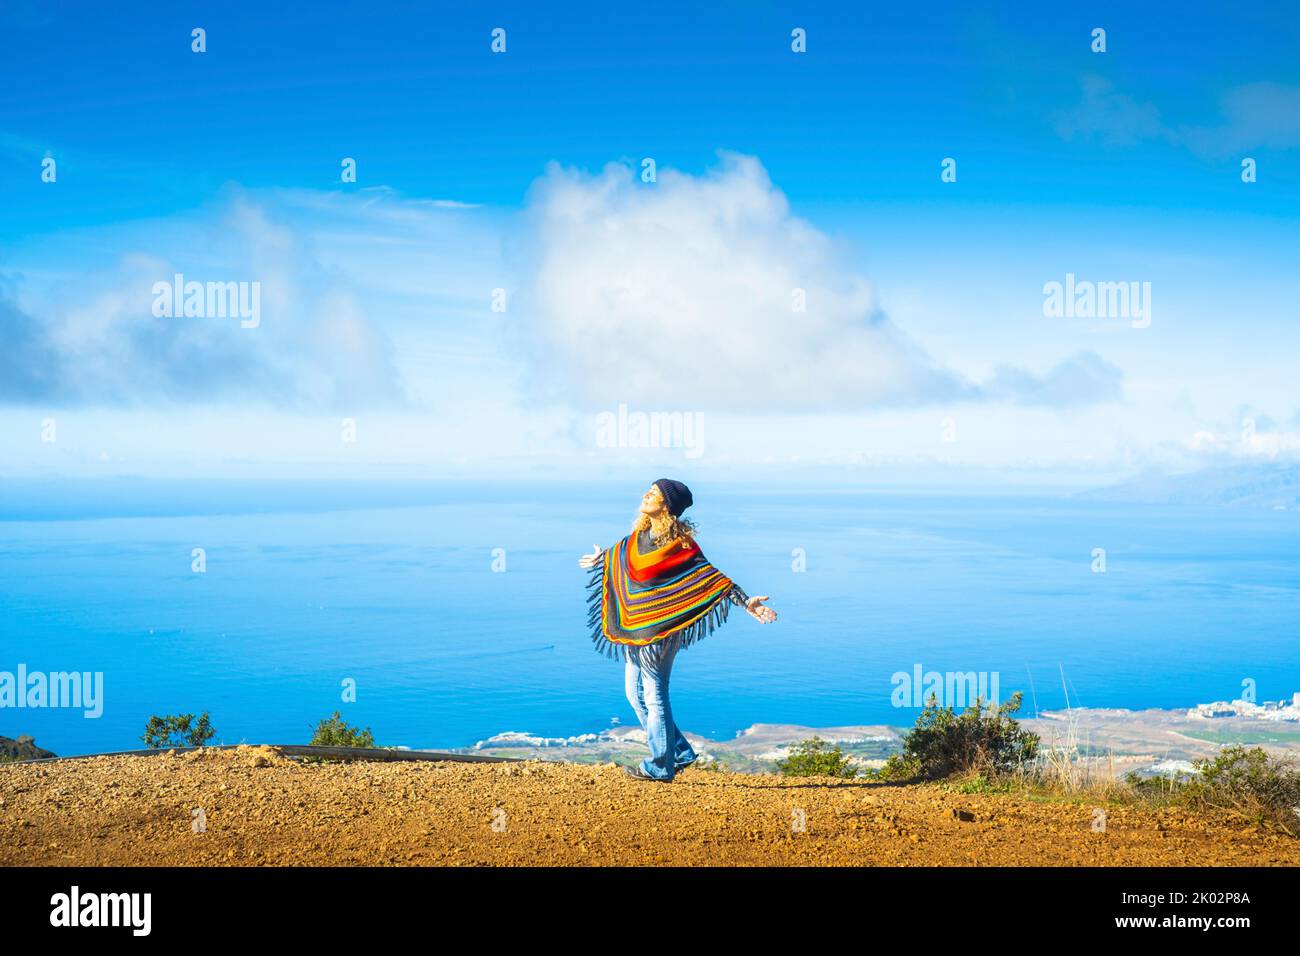 Overjoyed woman tourist opening and outstretching arms in front of a blue sea and sky scenic beautiful background. Happy travel lifestyle for female people wearing colorful clothes Stock Photo